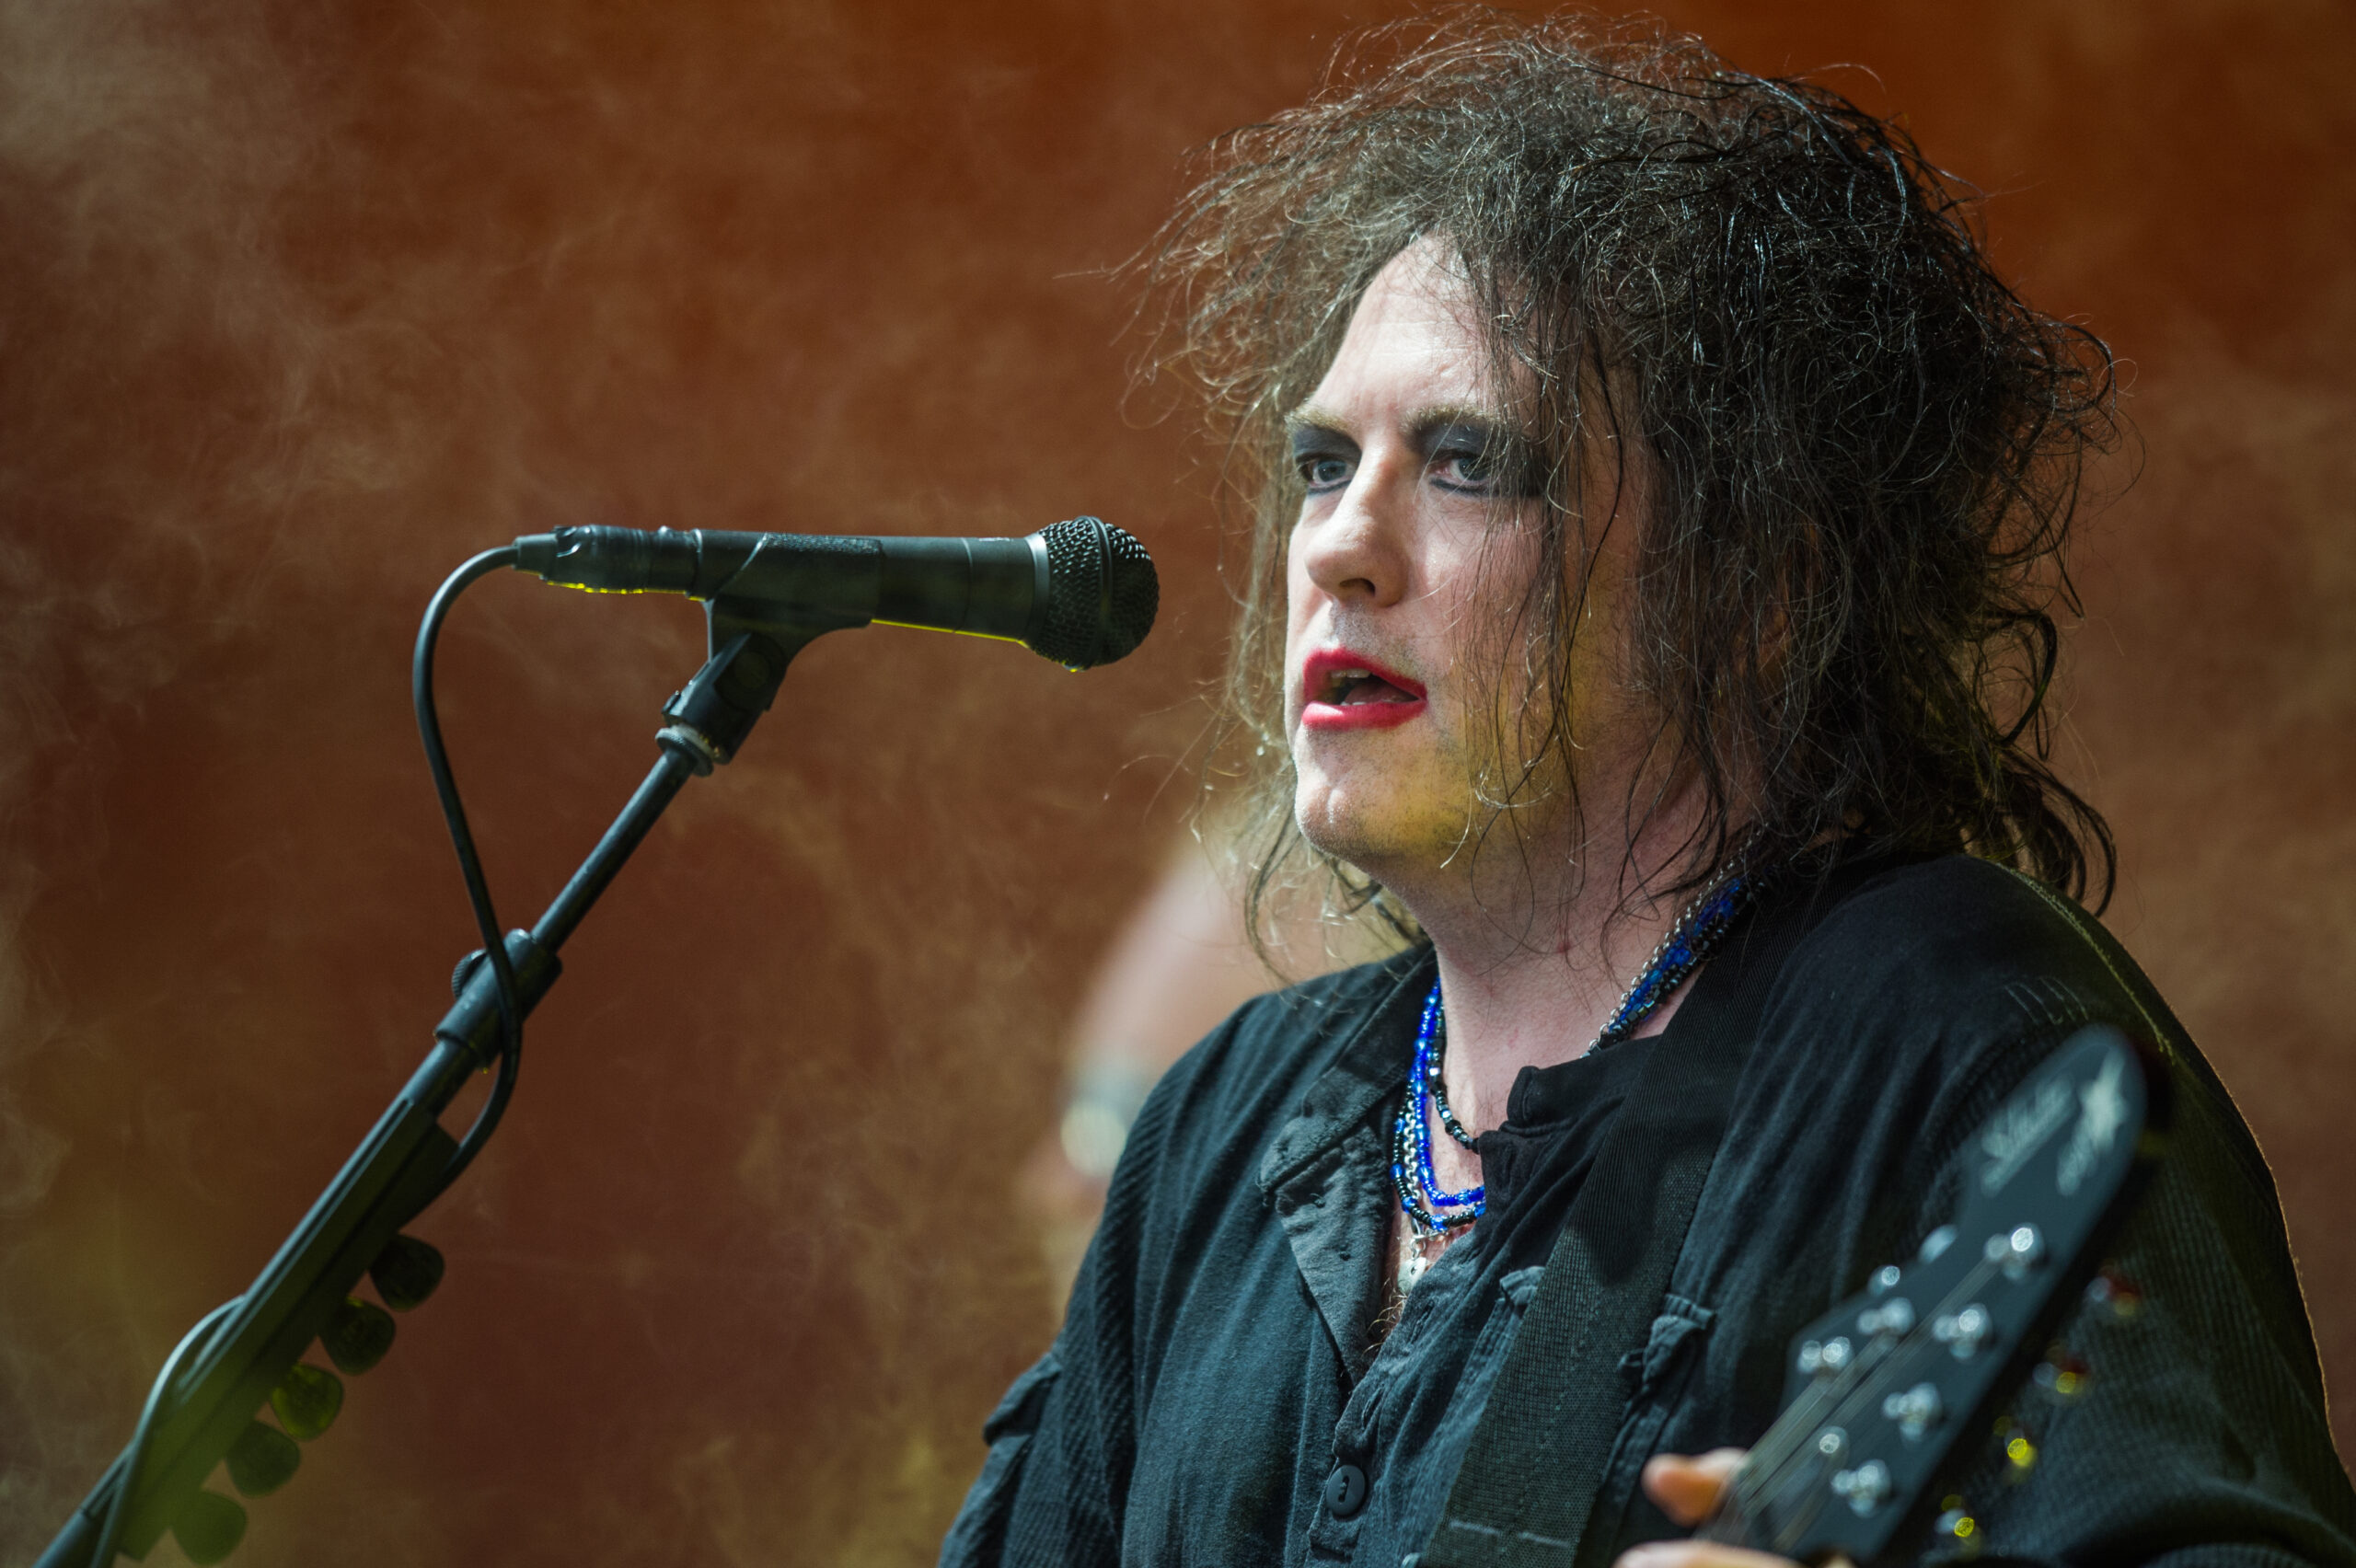 Robert Smith of The Cure